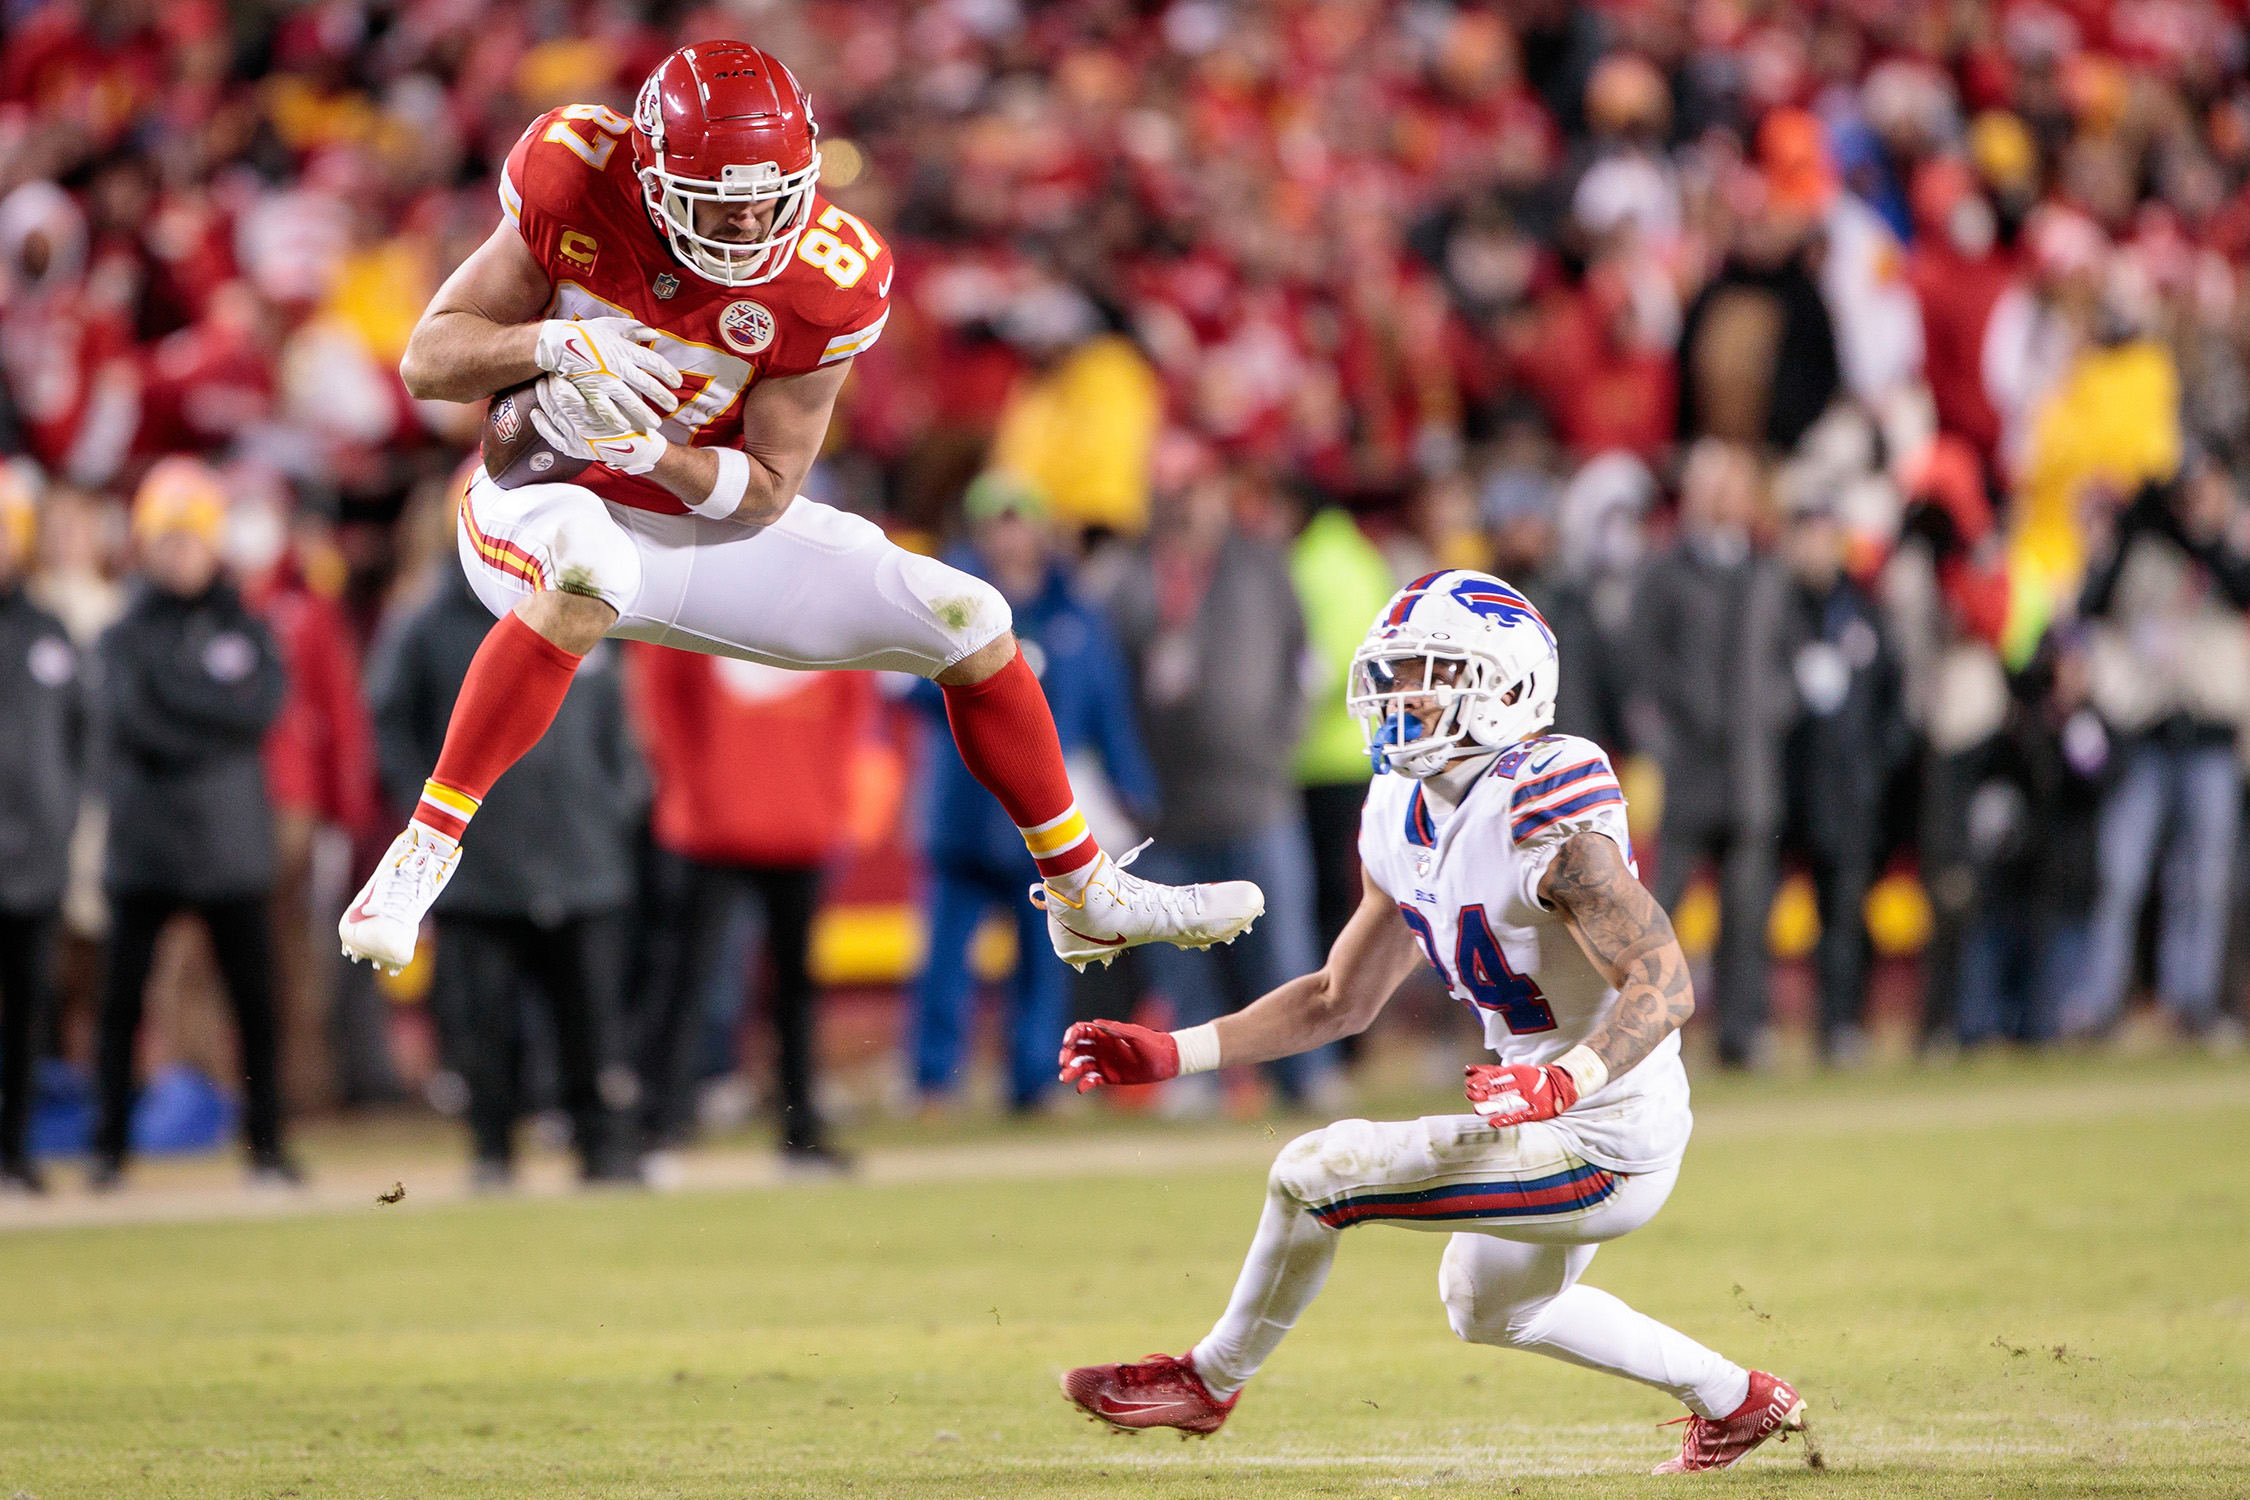 Kansas City Chiefs tight end Travis Kelce leaps for a reception over Buffalo Bills cornerback Taron Johnson during the AFC Divisional Round playoff game on Jan. 23, 2022 at Arrowhead Stadium in Kansas City, Missouri. 